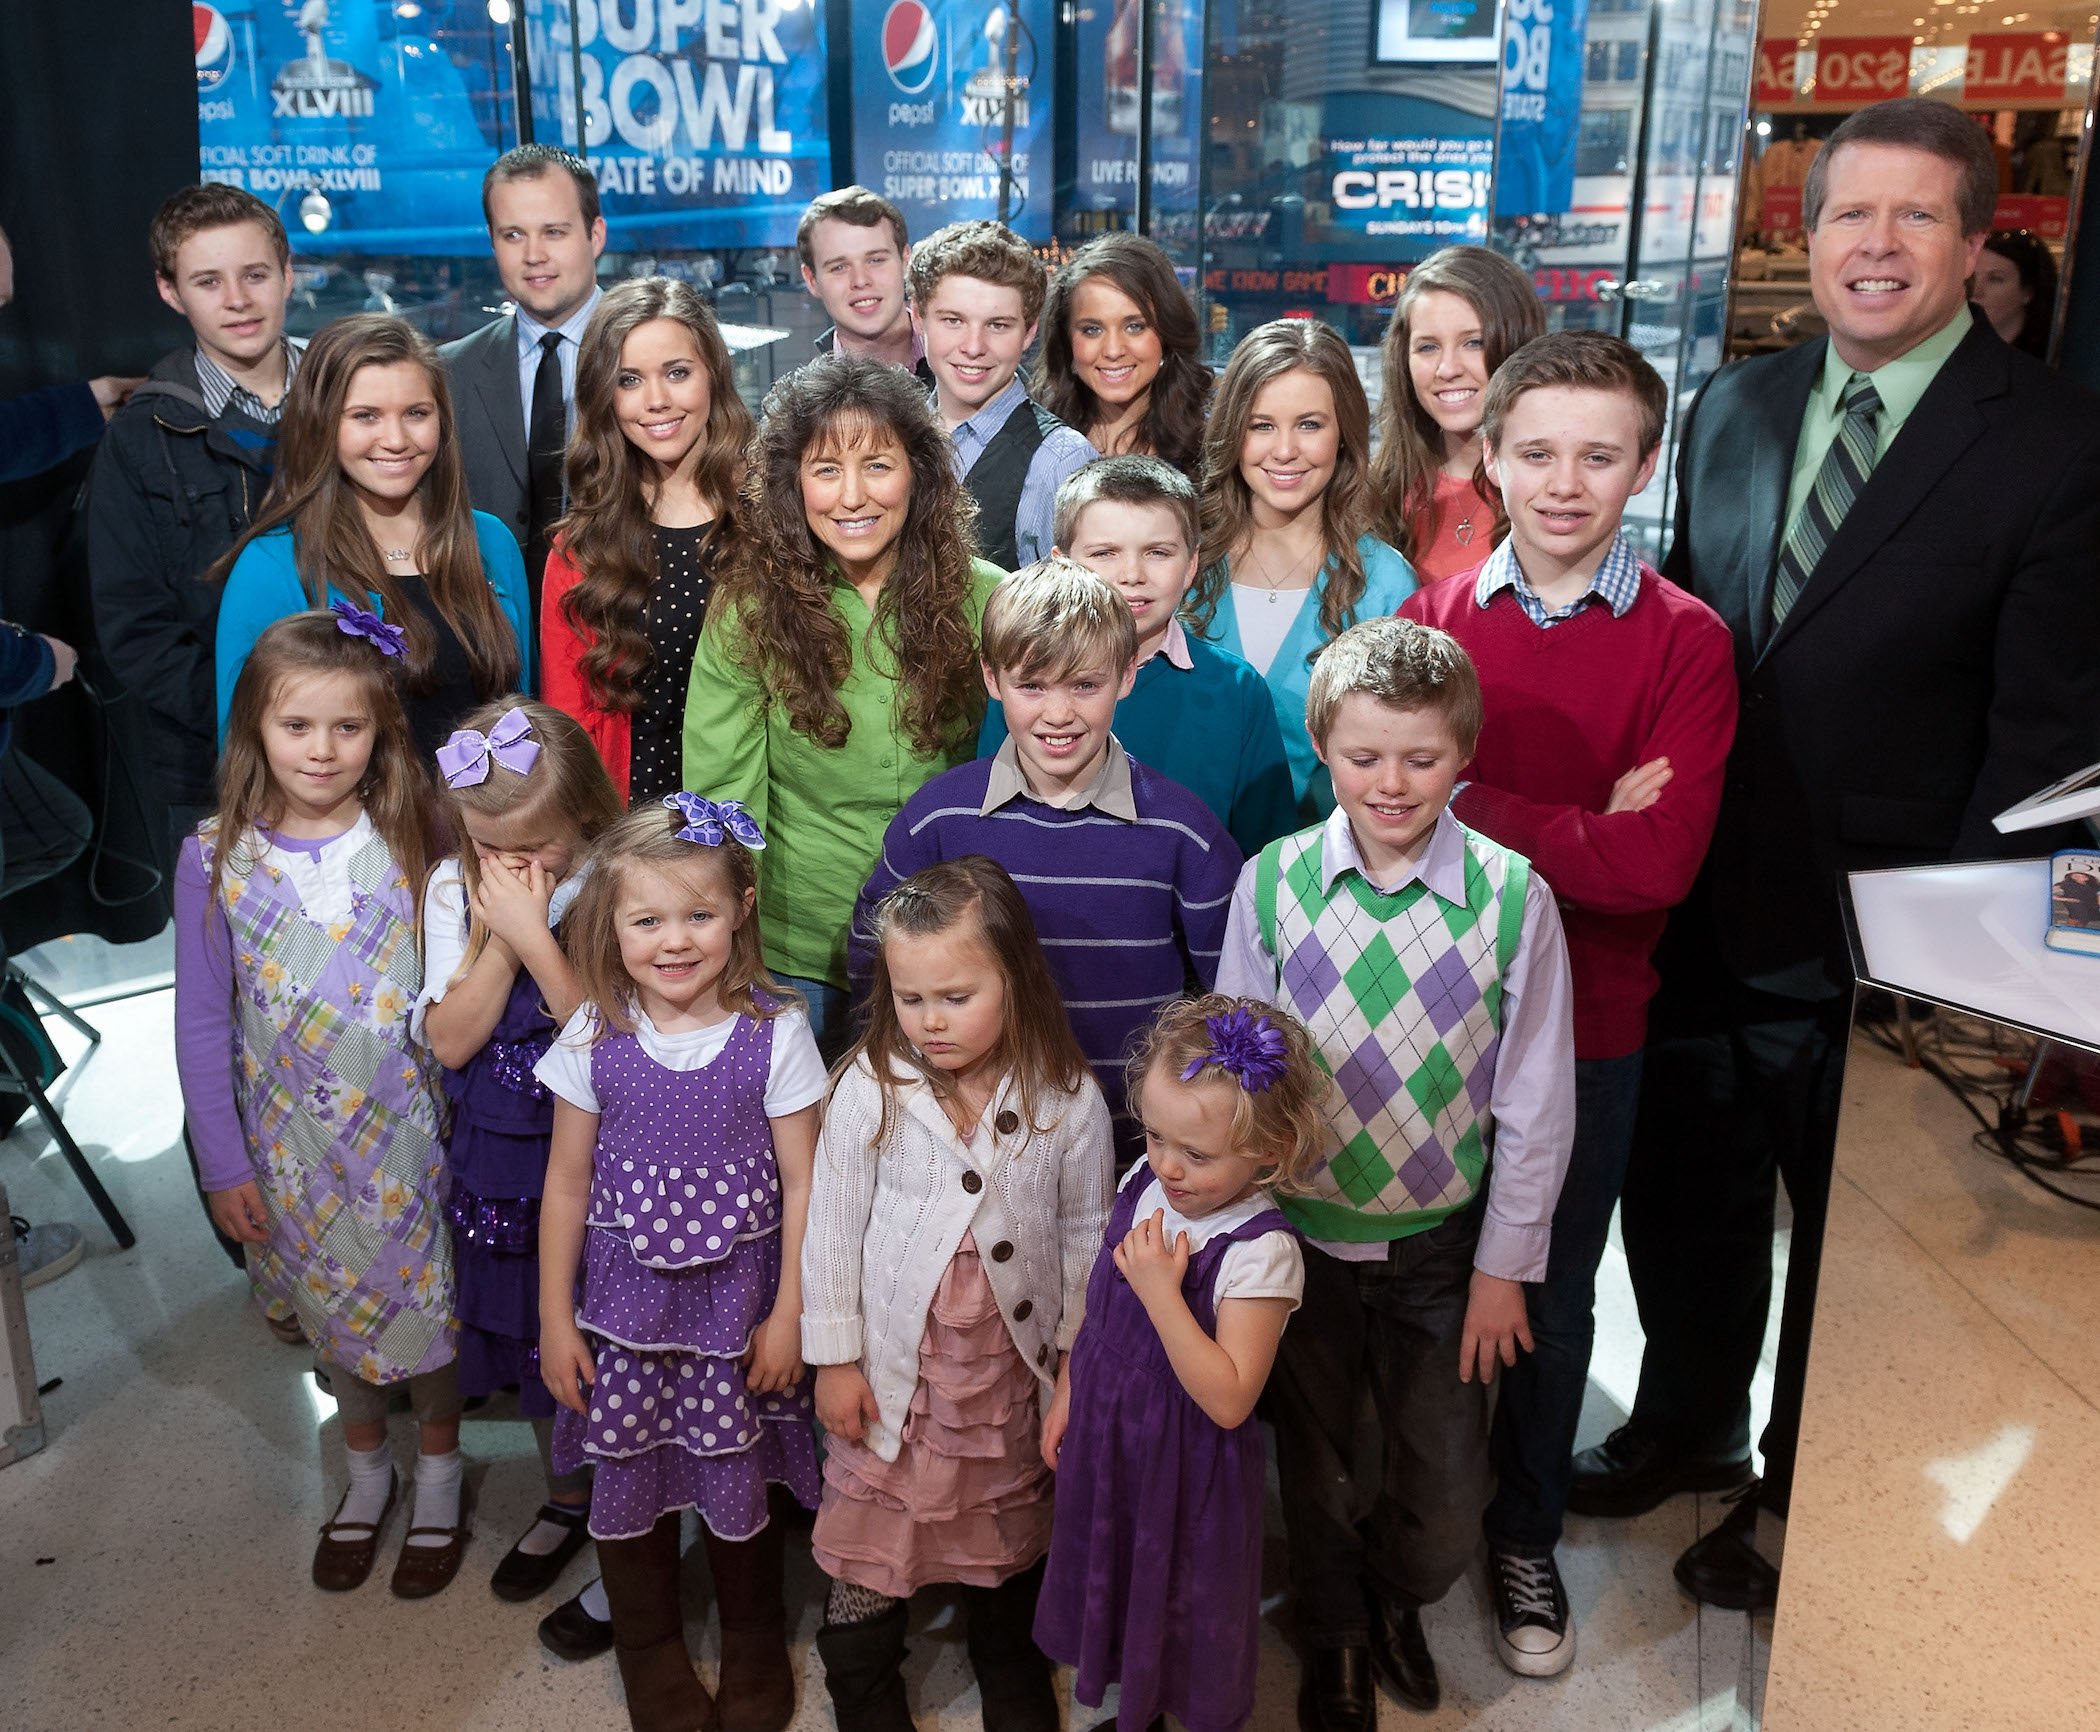 The Duggar family standing together on the 'Extra' stage looking up and smiling at the camera